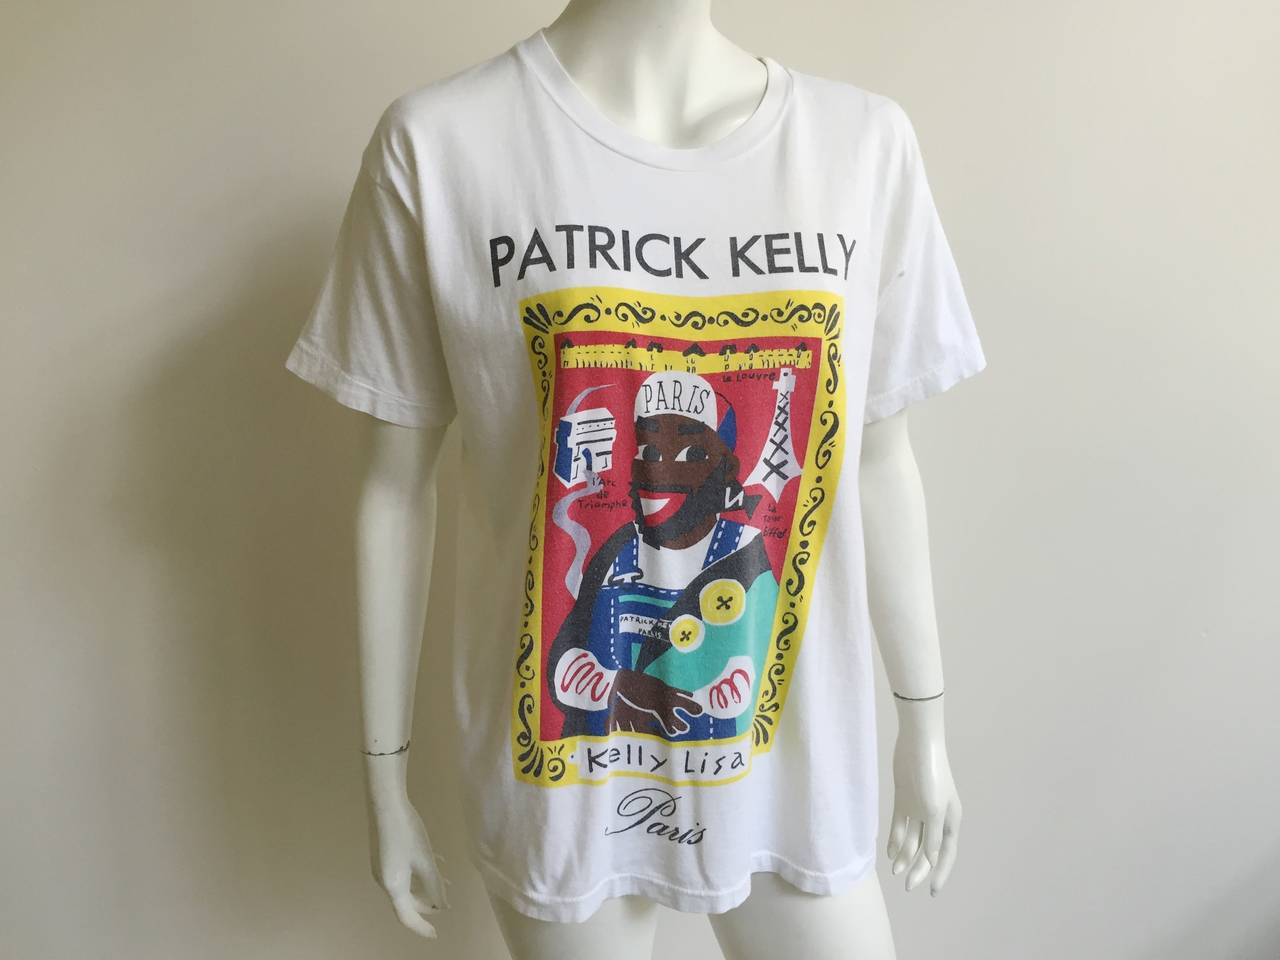 Patrick Kelly 1988 'Kelly Lisa' t-shirt is from the private collection of long time friend & model Carol Martin. Patrick Kelly adored Paris and the French adored Patrick Kelly. In this t-shirt he is paying homage to the Arc de Triomphe, The Louvre